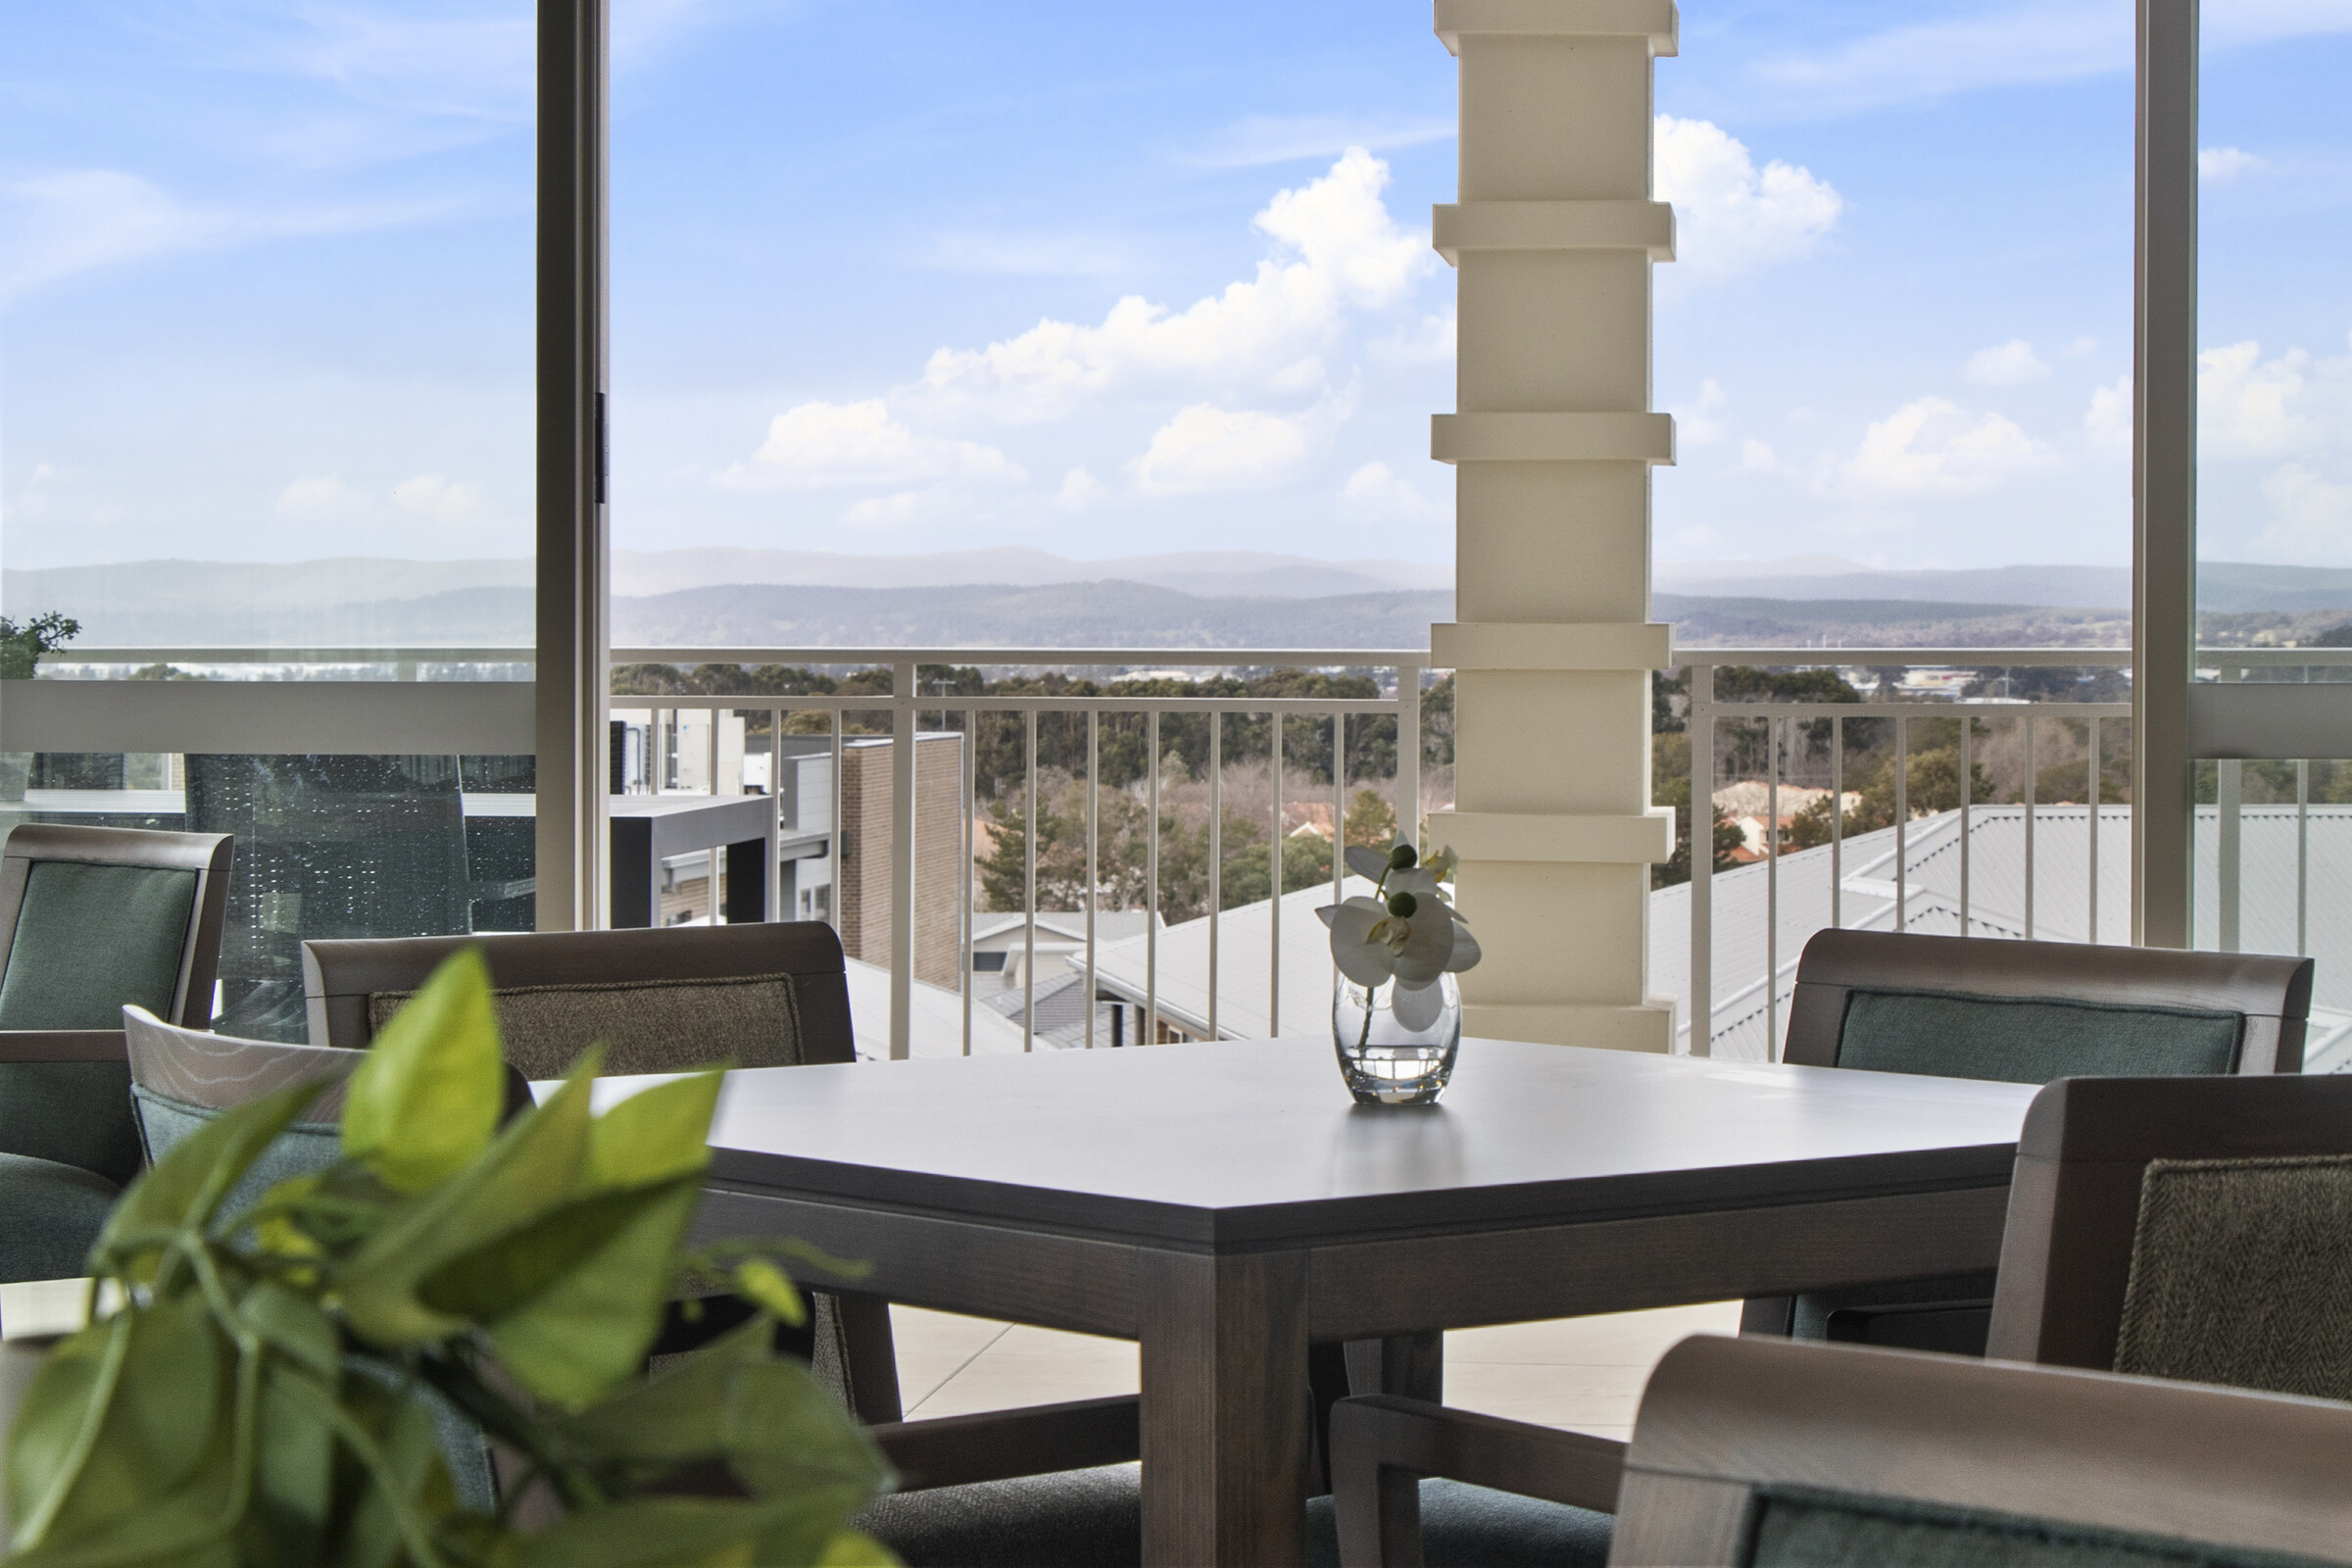 NARV - The Aerie at Narrabundah - Village Photography - View from Outdoor Balcony Dining